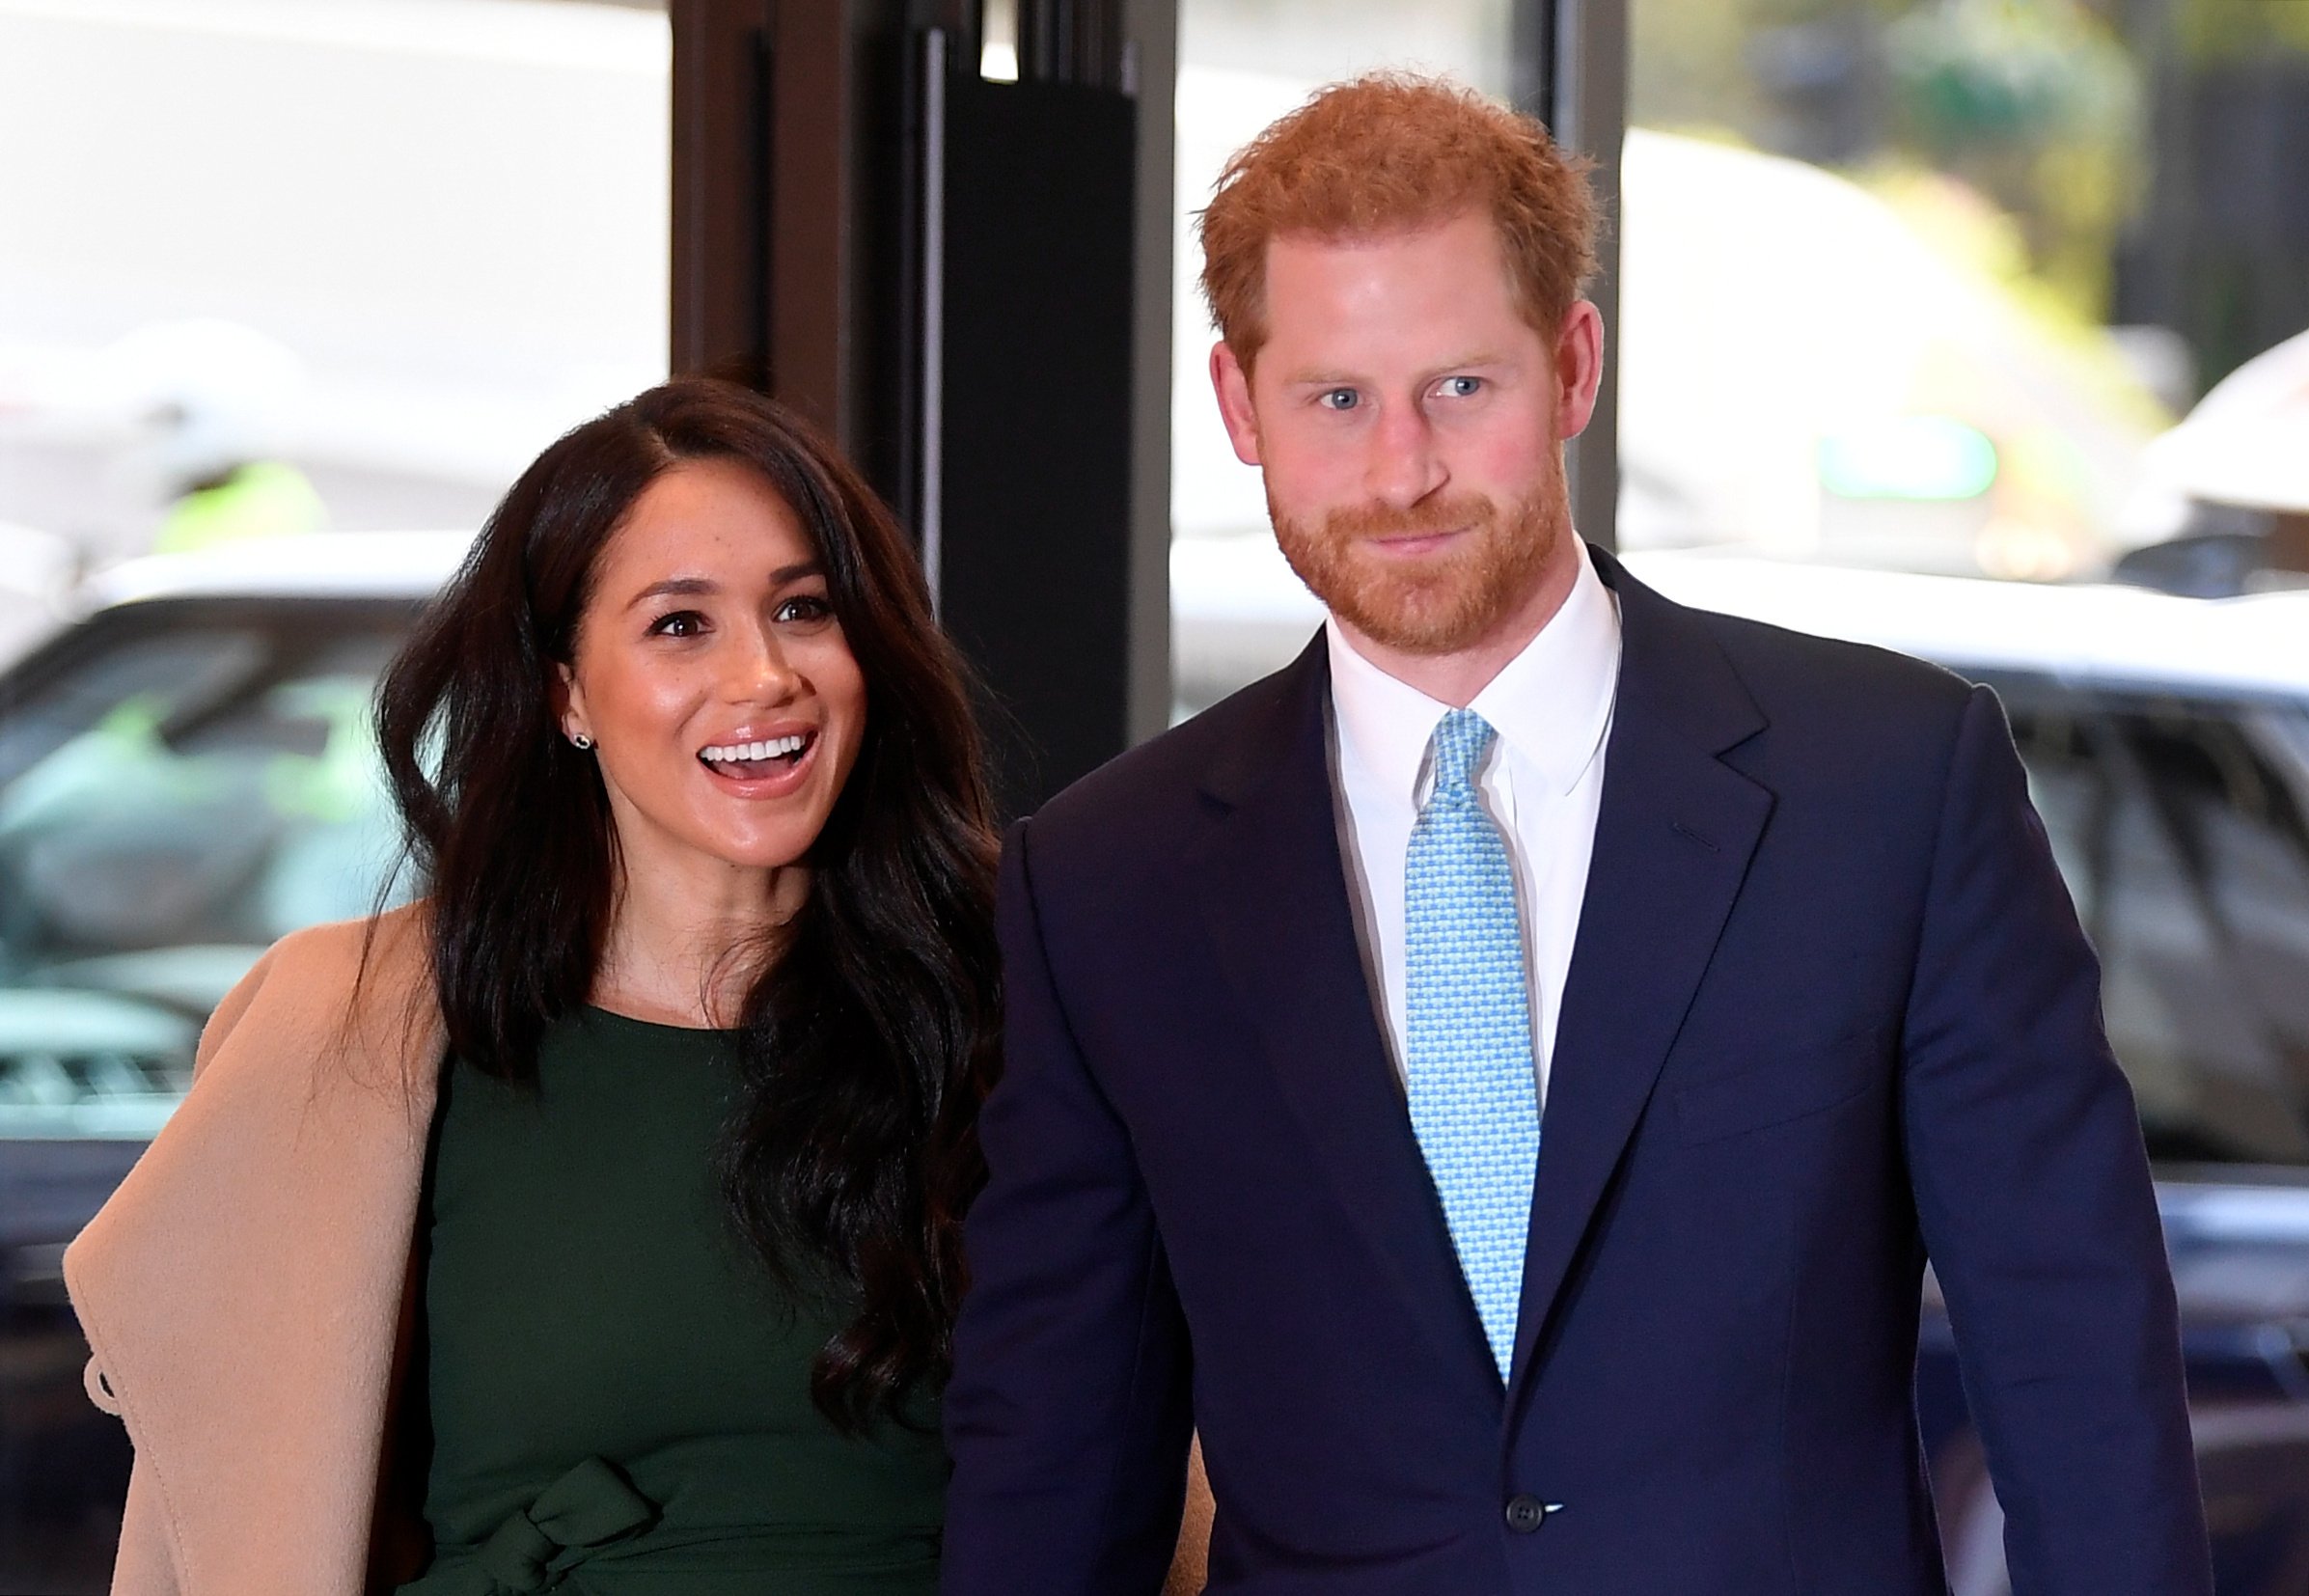 Meghan Markle and Prince Harry attend the WellChild awards in London, England on October 15, 2019 | Photo: Getty Images